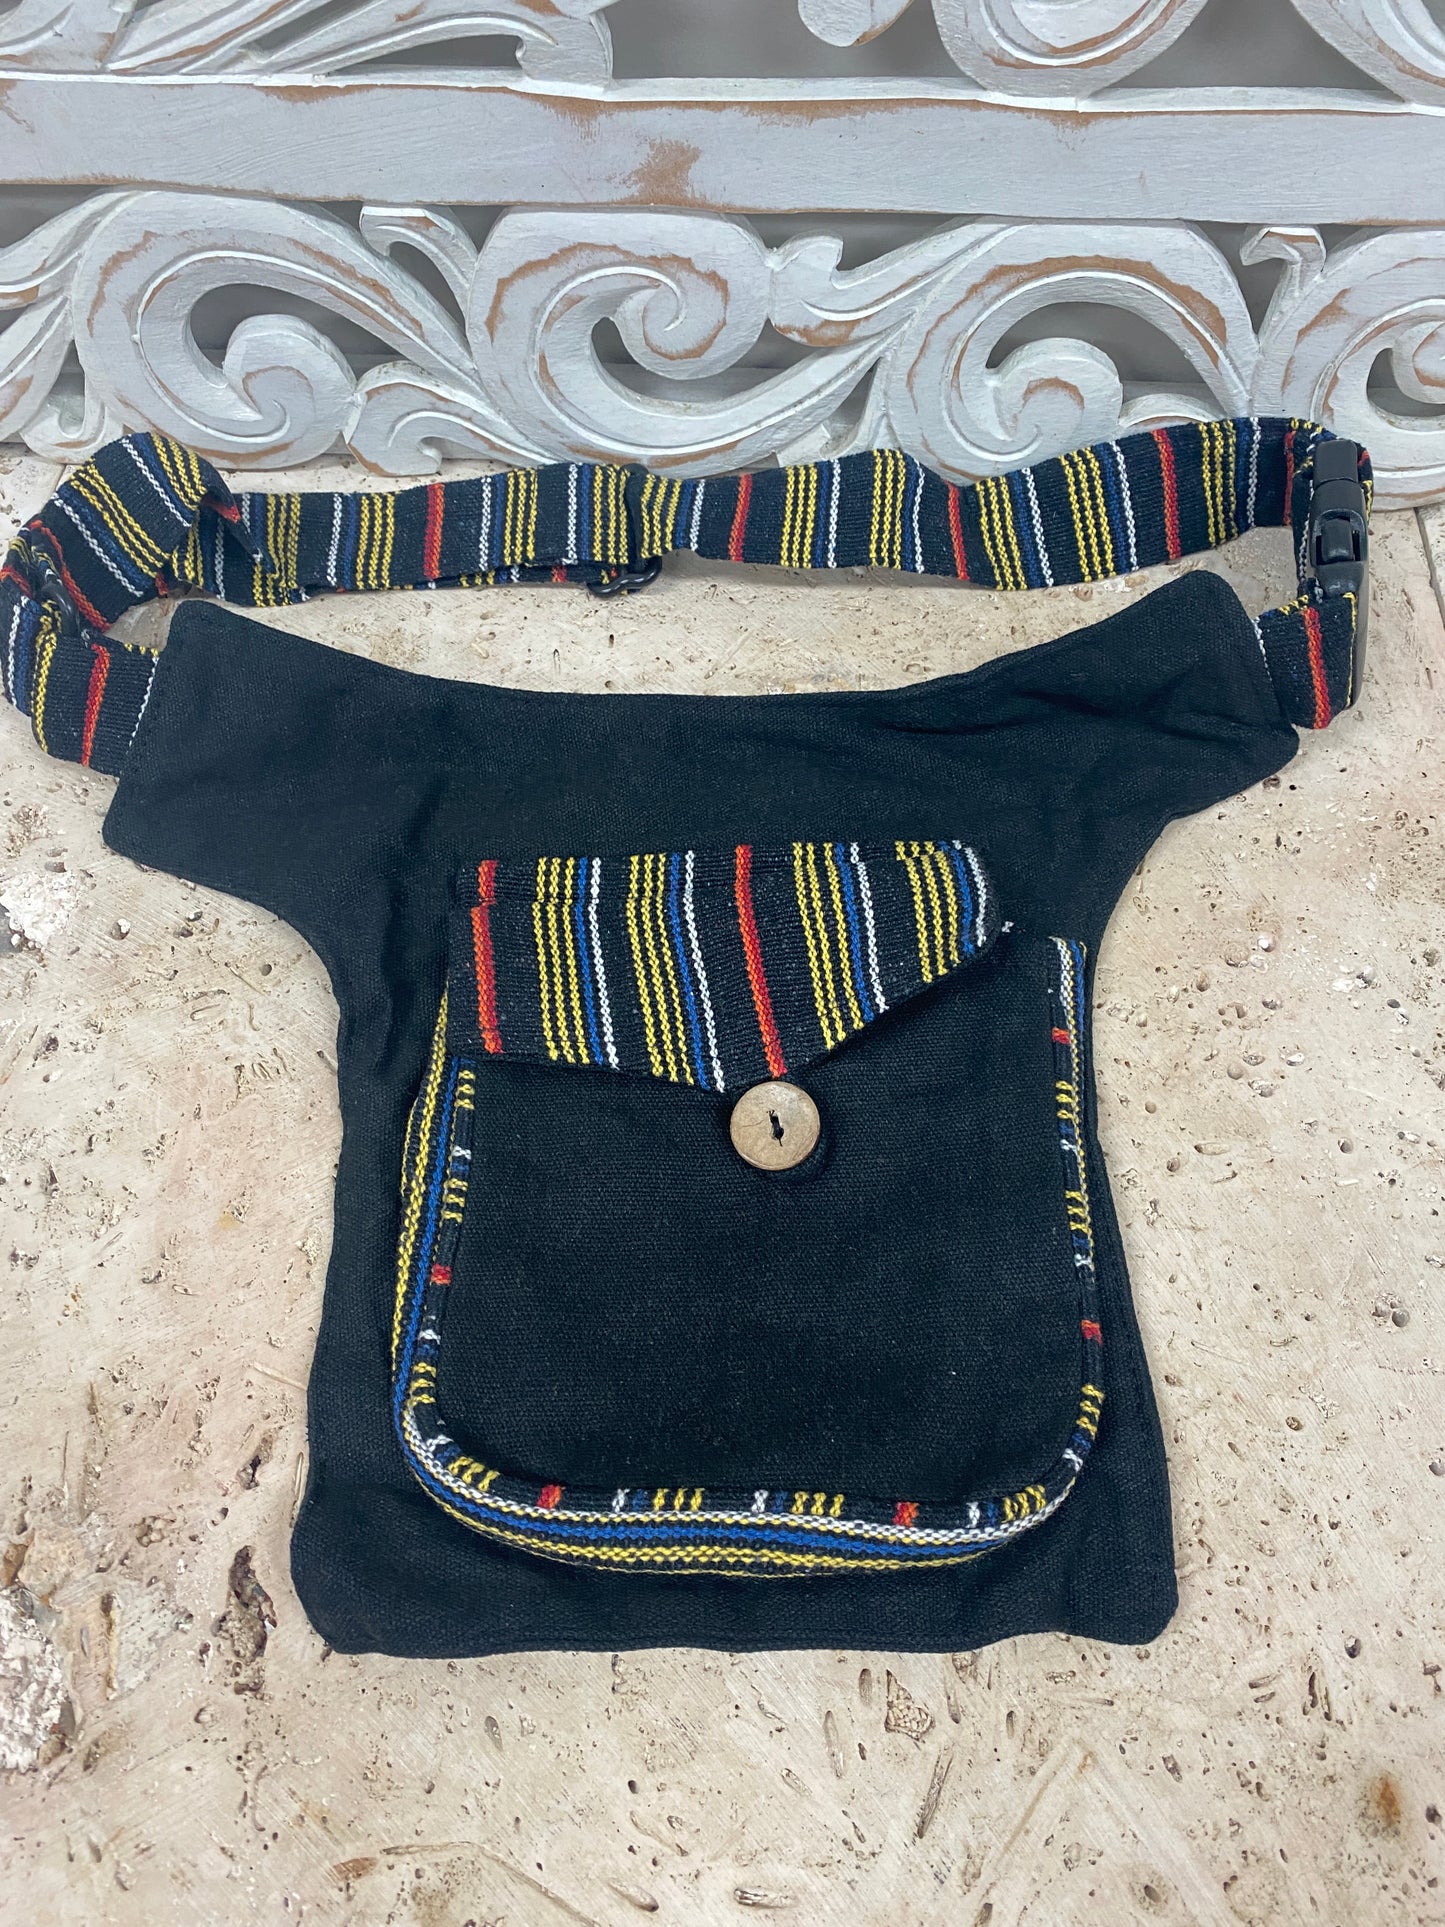 Unisex 100% Cotton Fanny Pack - Available in 7 Colors